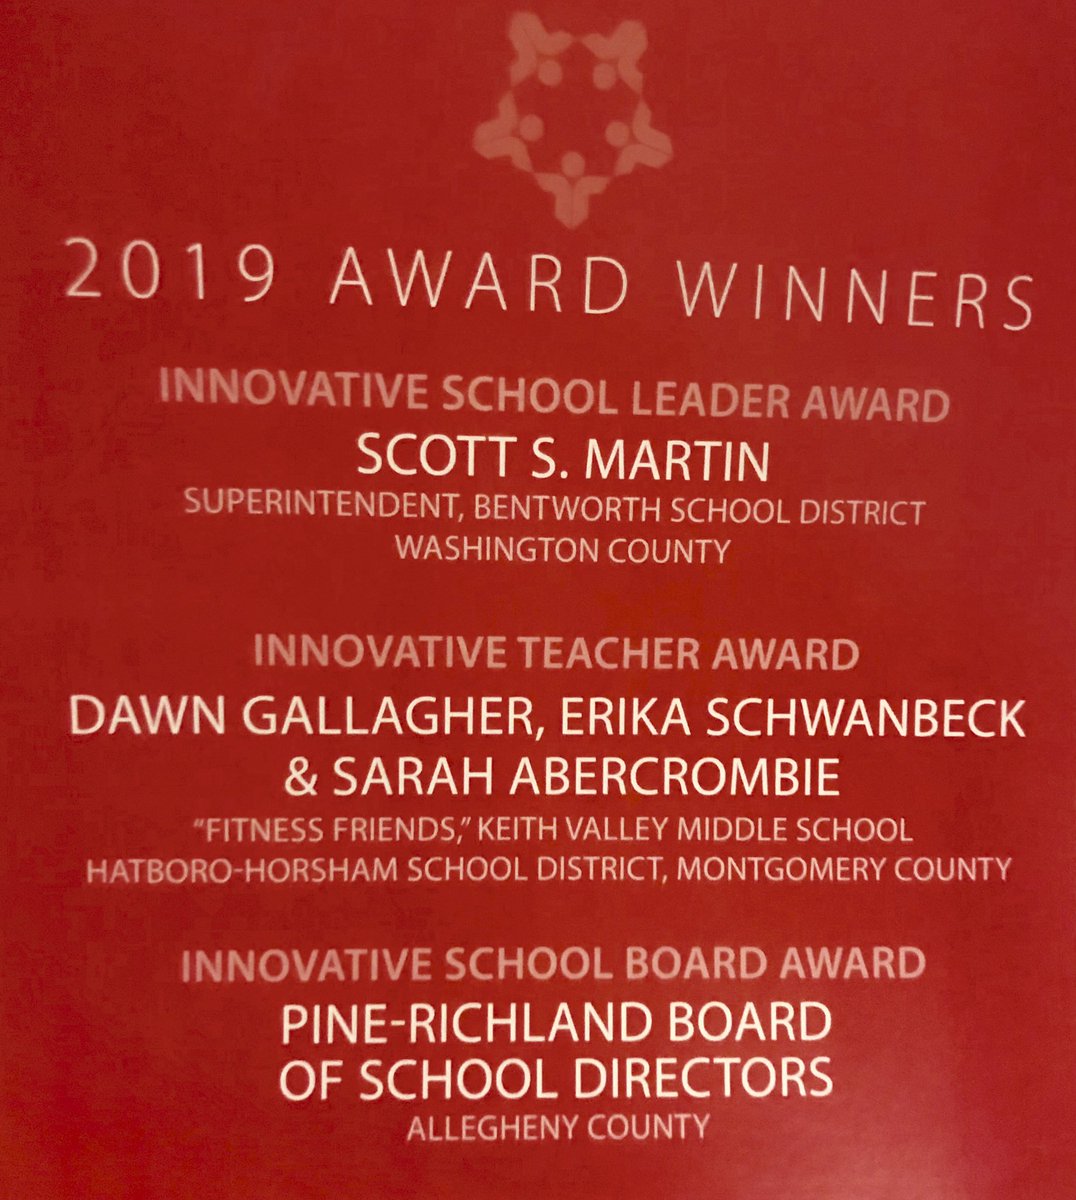 Congratulations to the 2019 award winners! Thank you for your innovative thinking for public education.  #PaSLC2019